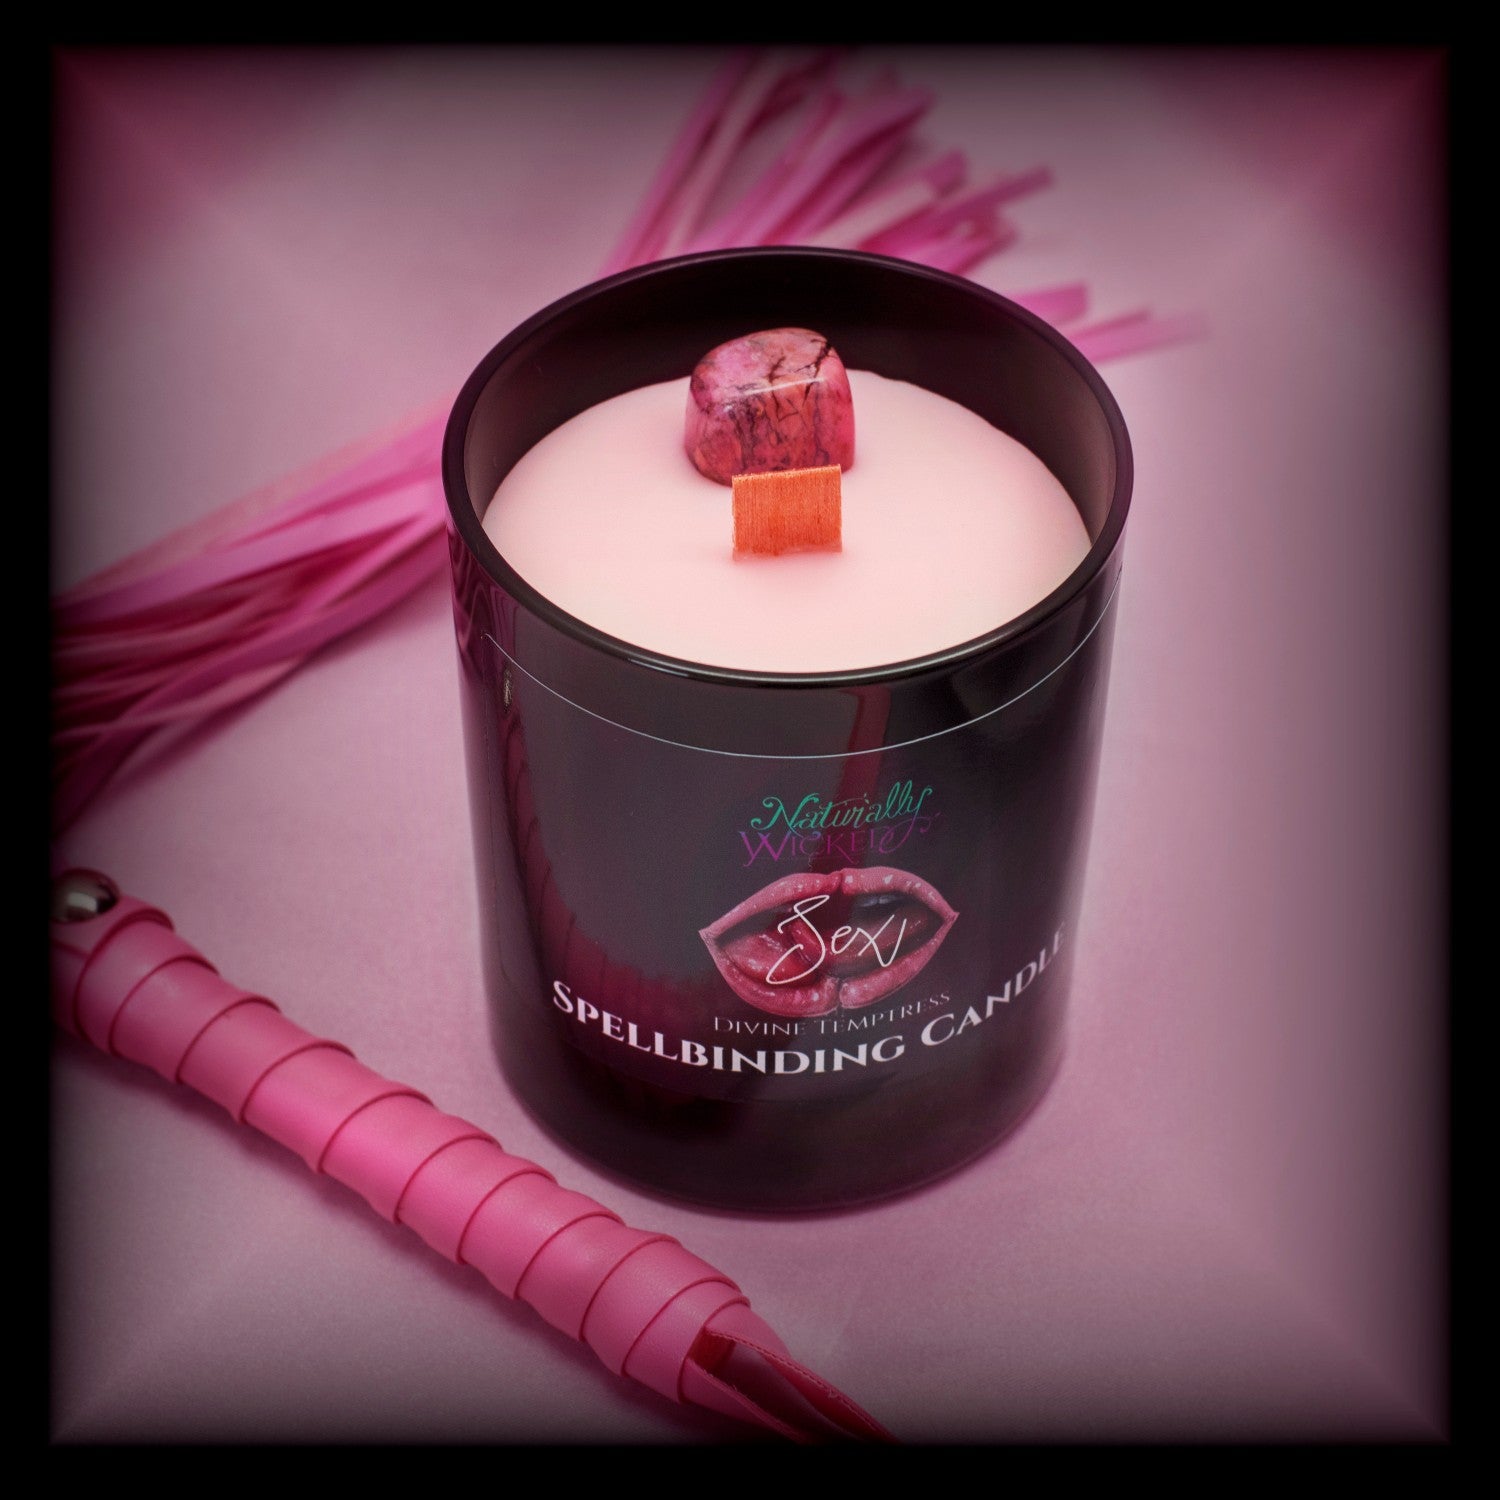 A Unique And Sexy Gift.  A Scenic View Of The Perfect Sexy Spell Candle Next To Pink Seductive Whips. Naturally Wicked Spellbinding Sex Candle Proudly Presents It's Dark Black Gloss Label With A Pair Of Juicy Wet Pink Lips And Tongues Kissing Seductively On The Front. The Candle Features Plant-based Smooth Pink Wax, A Wood Wick And A Beautiful Rhodonite Crystal.